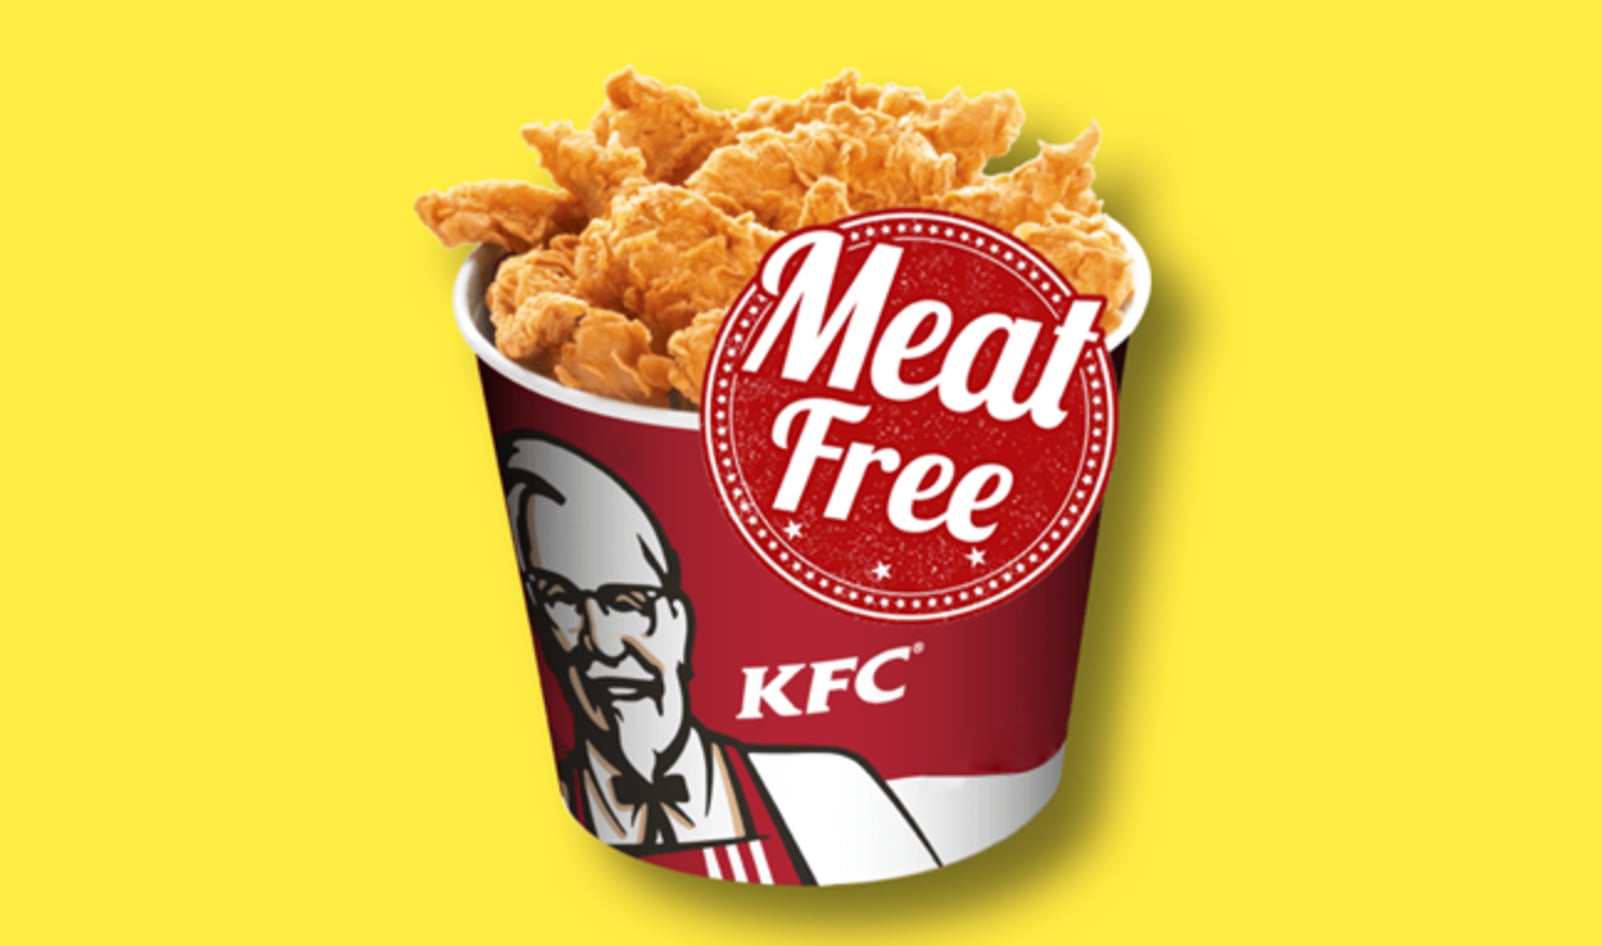 KFC Promises to Not “Let Vegans Down” with New Meatless Options